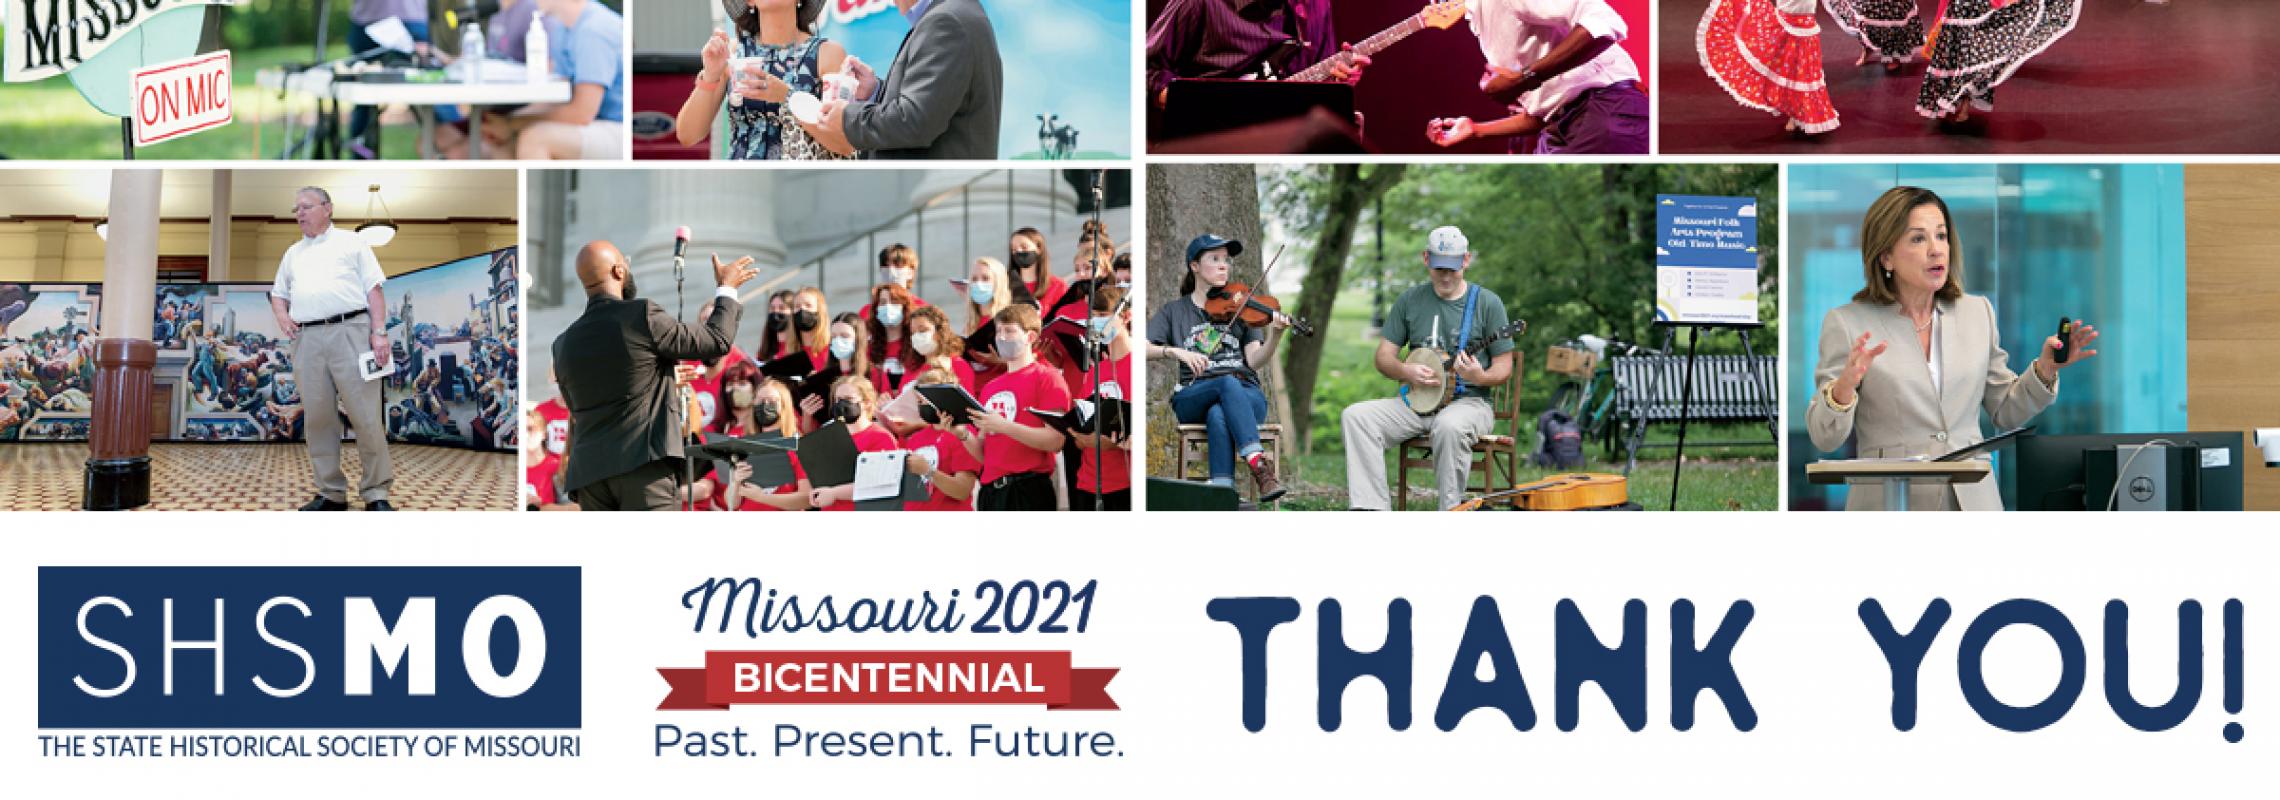 Photos from bicentennial events with SHSMO and MO2021 logos and the message Thank You!